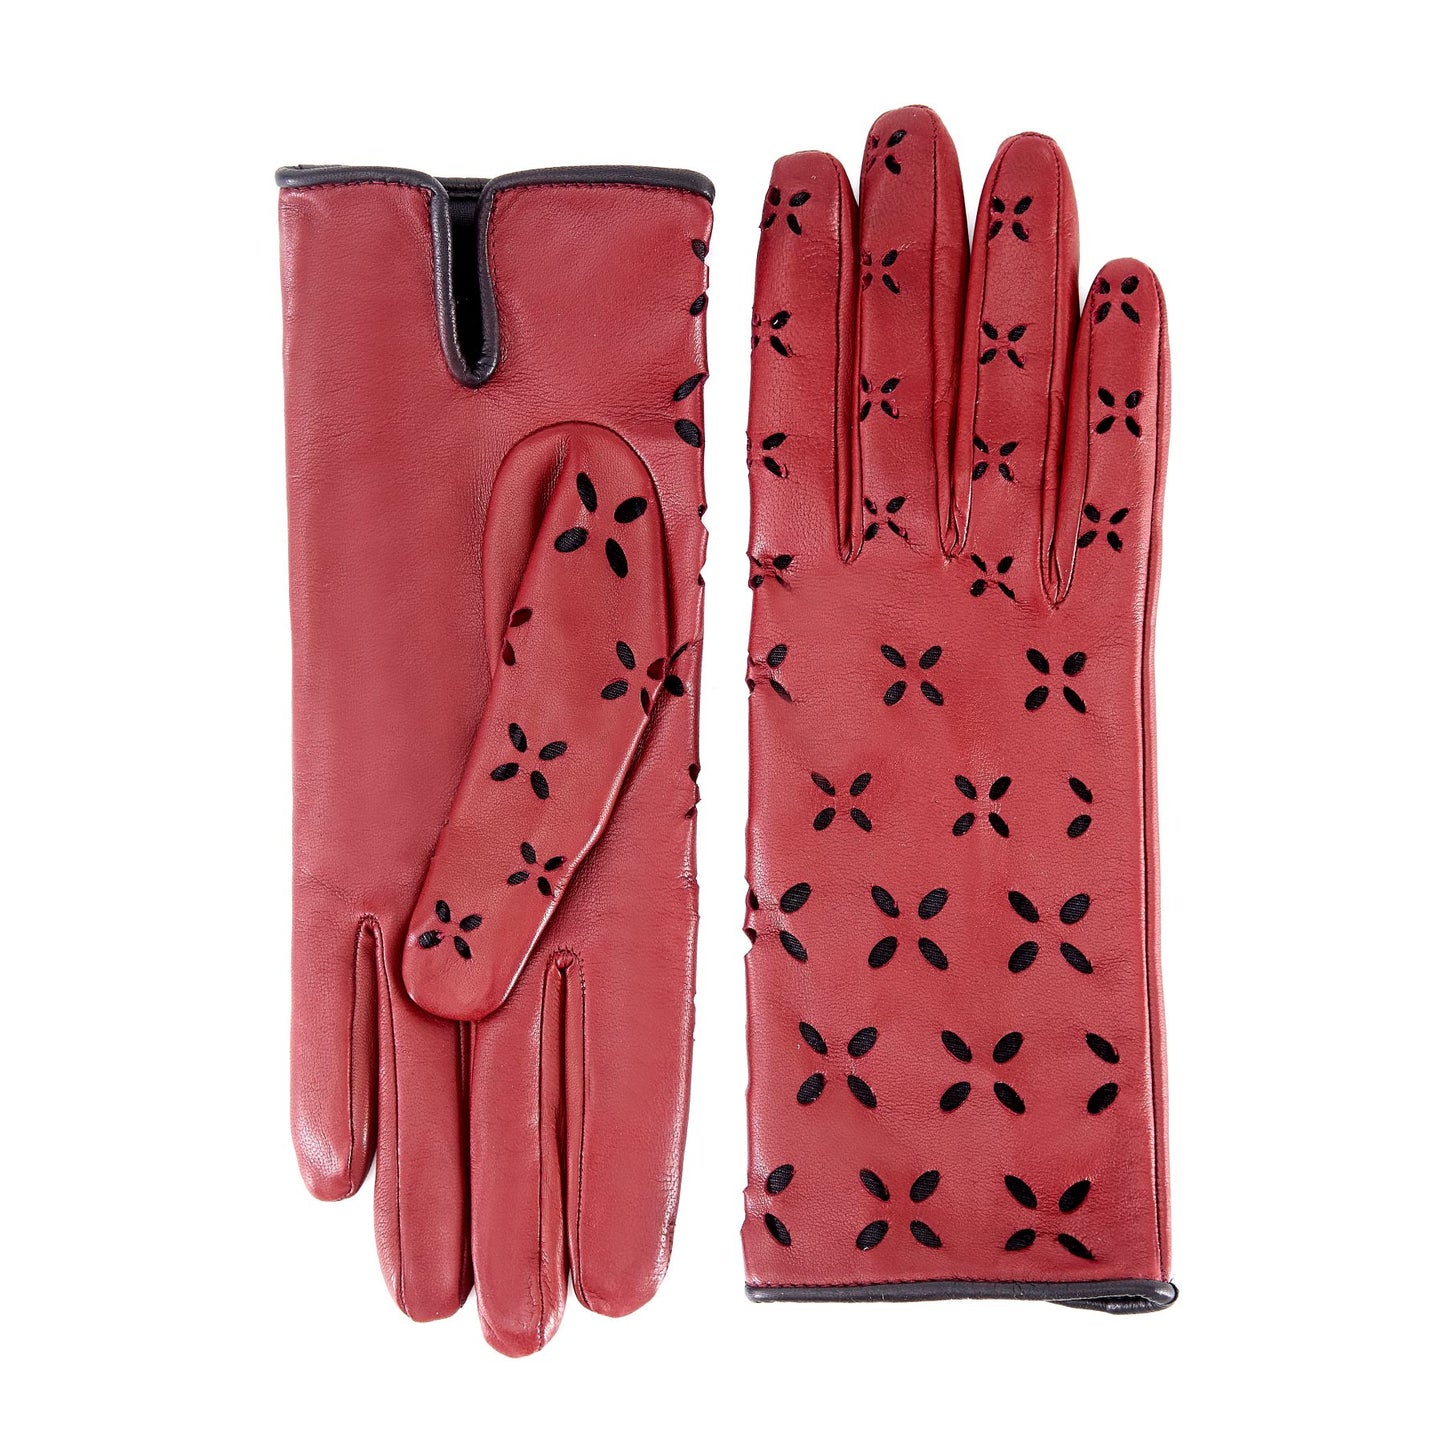 Women's rum nappa leather gloves with laser cut petals detail and polyamide lining